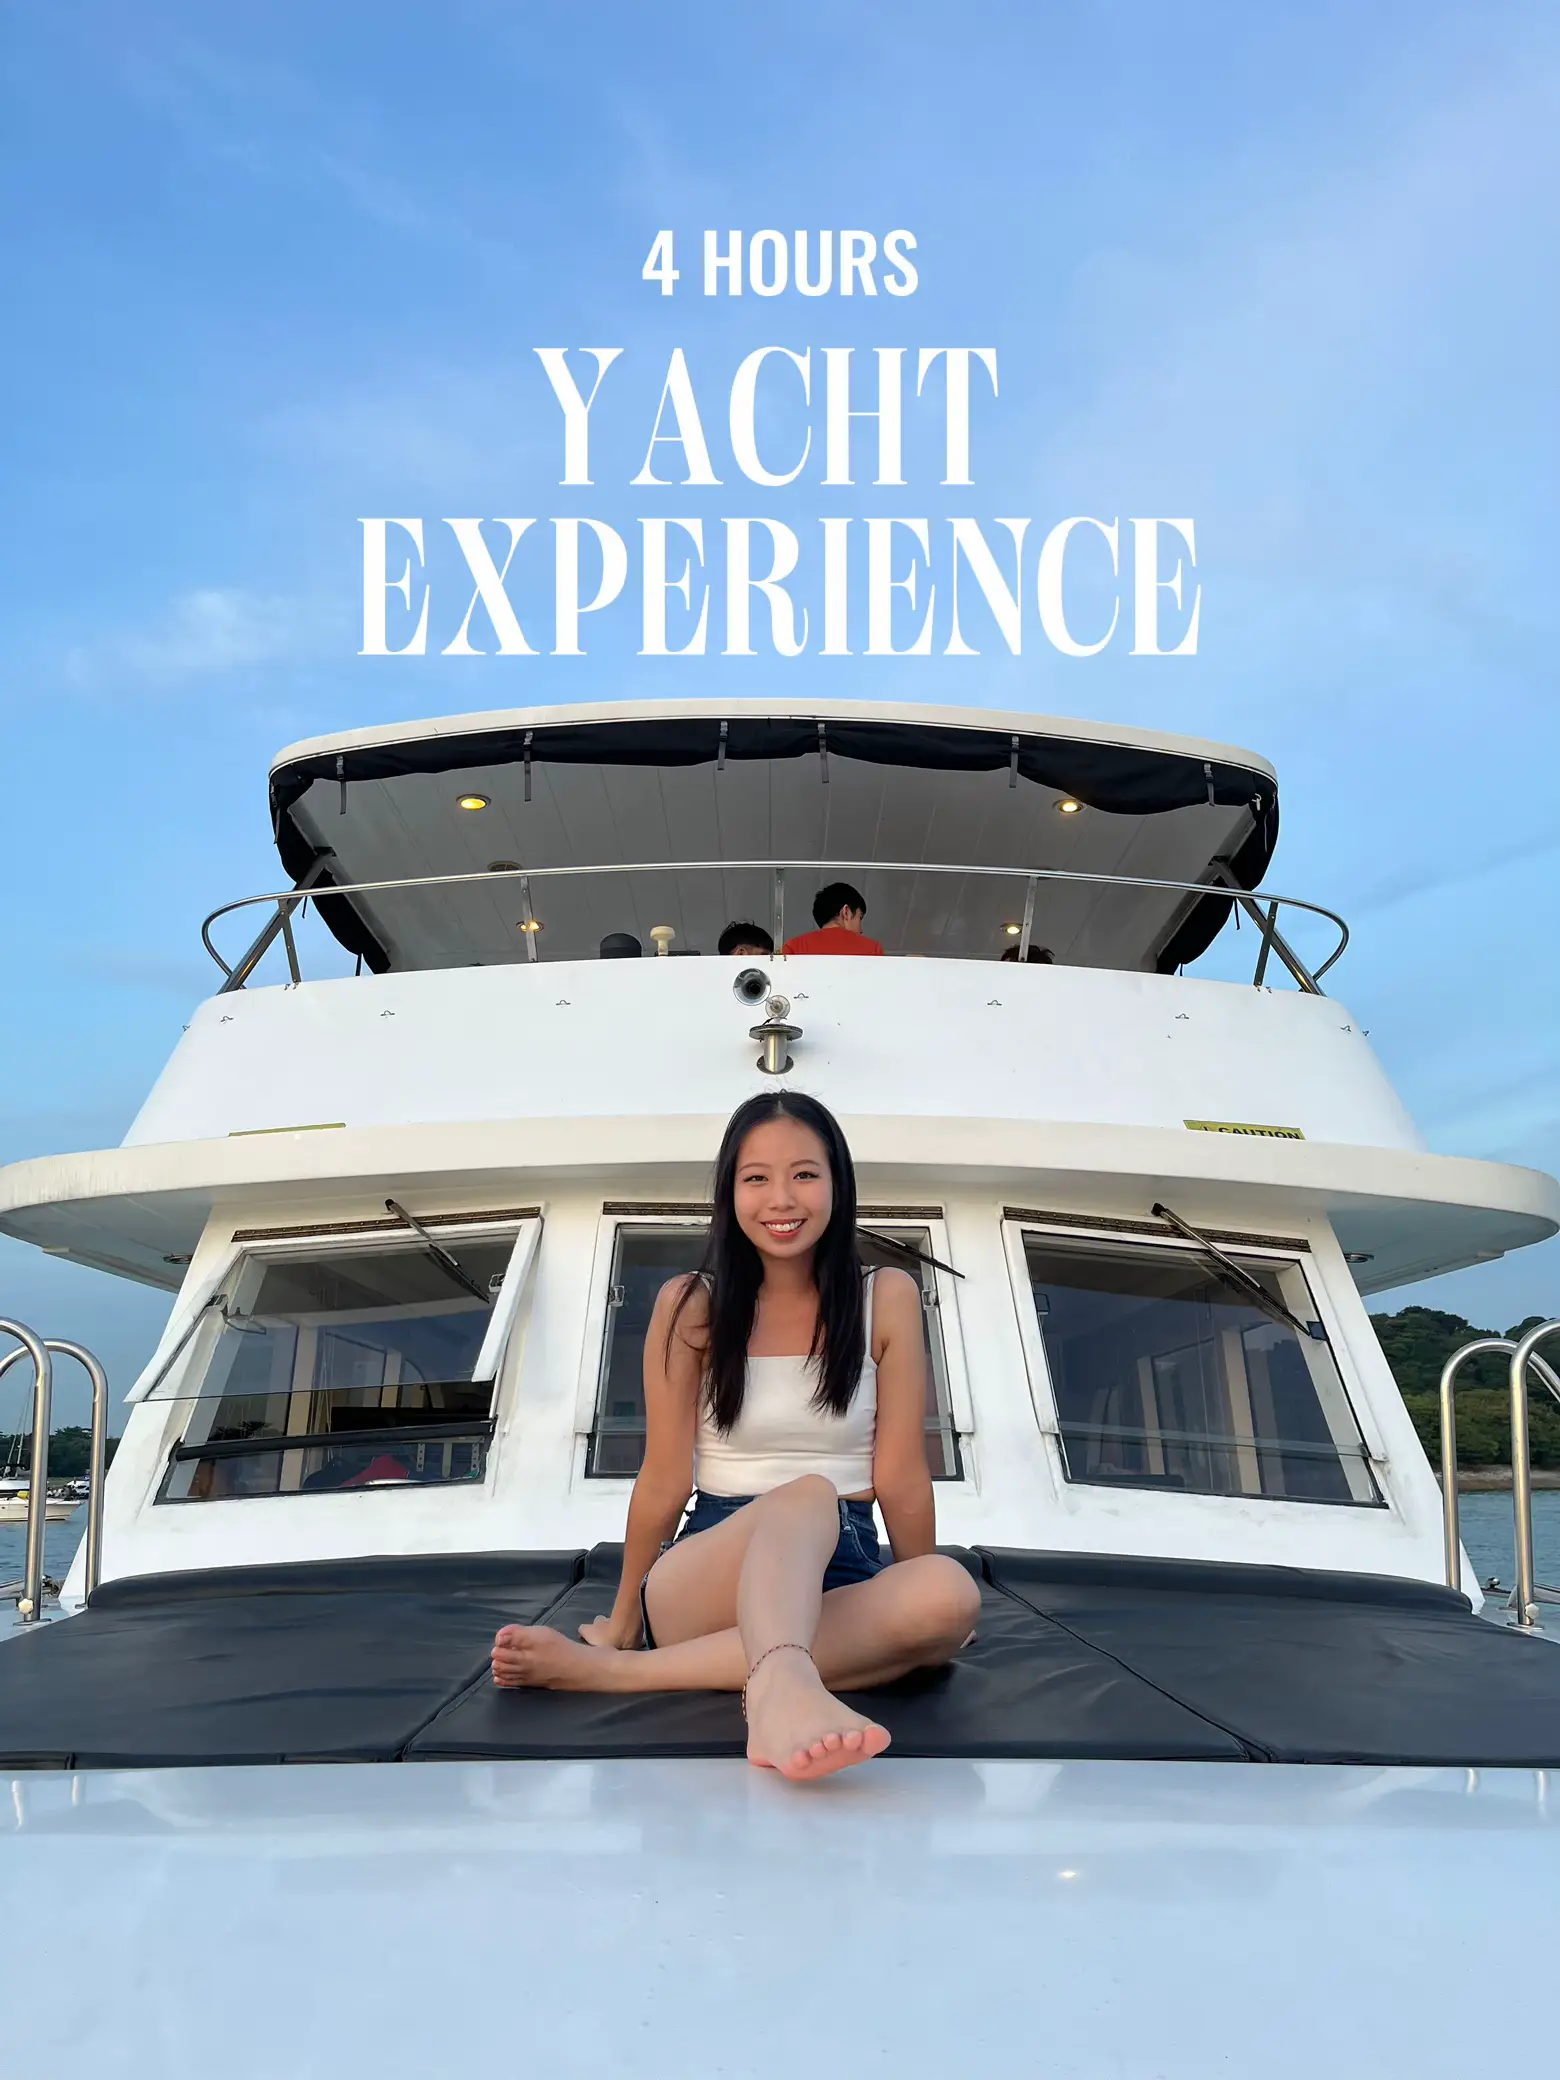 Yacht Experience! 's images(0)